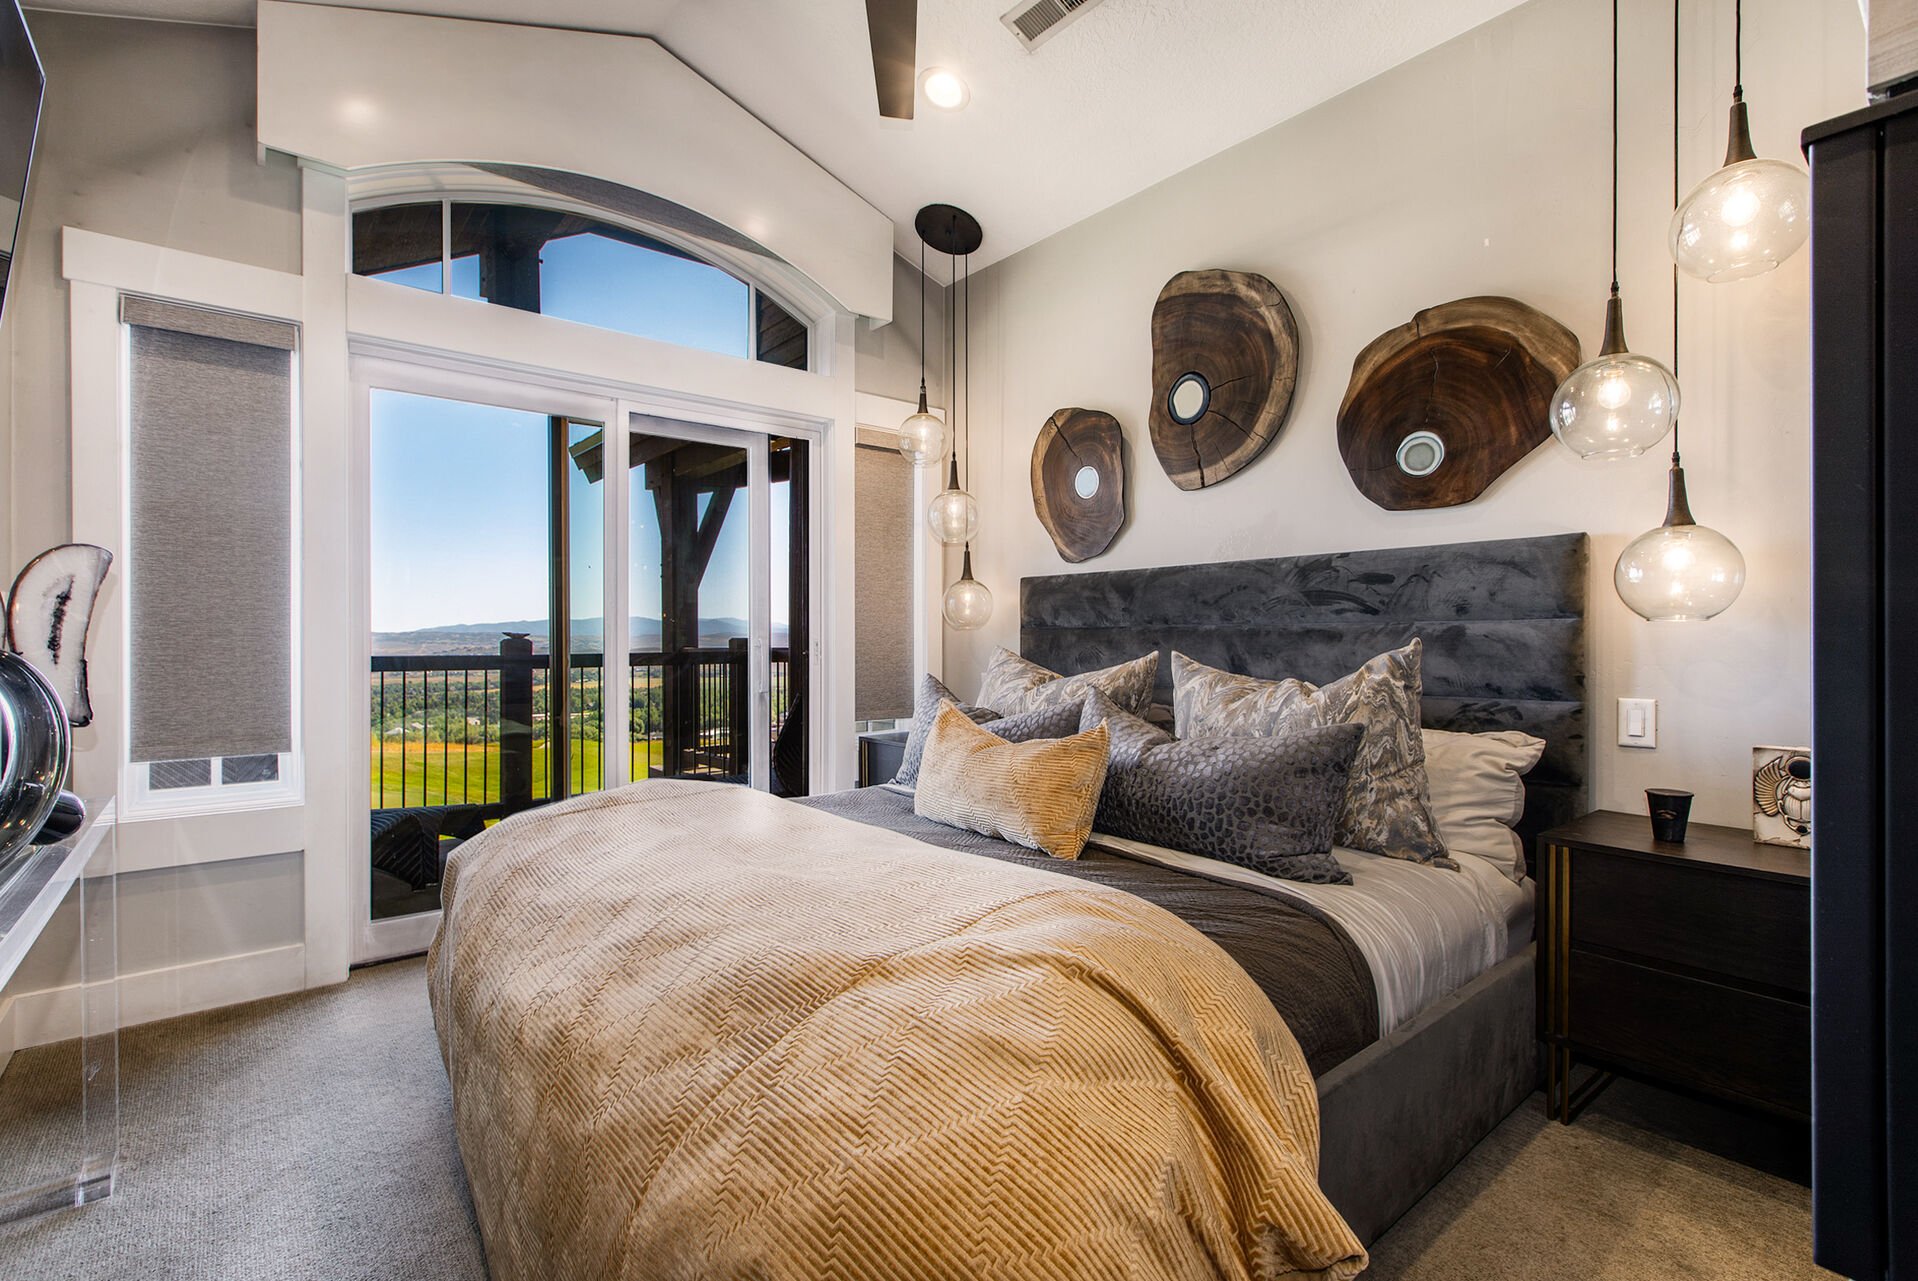 Master Bedroom with King Bed, Contemporary Decor, Double-sided Gas Fireplace, and a Deck with Stunning Views